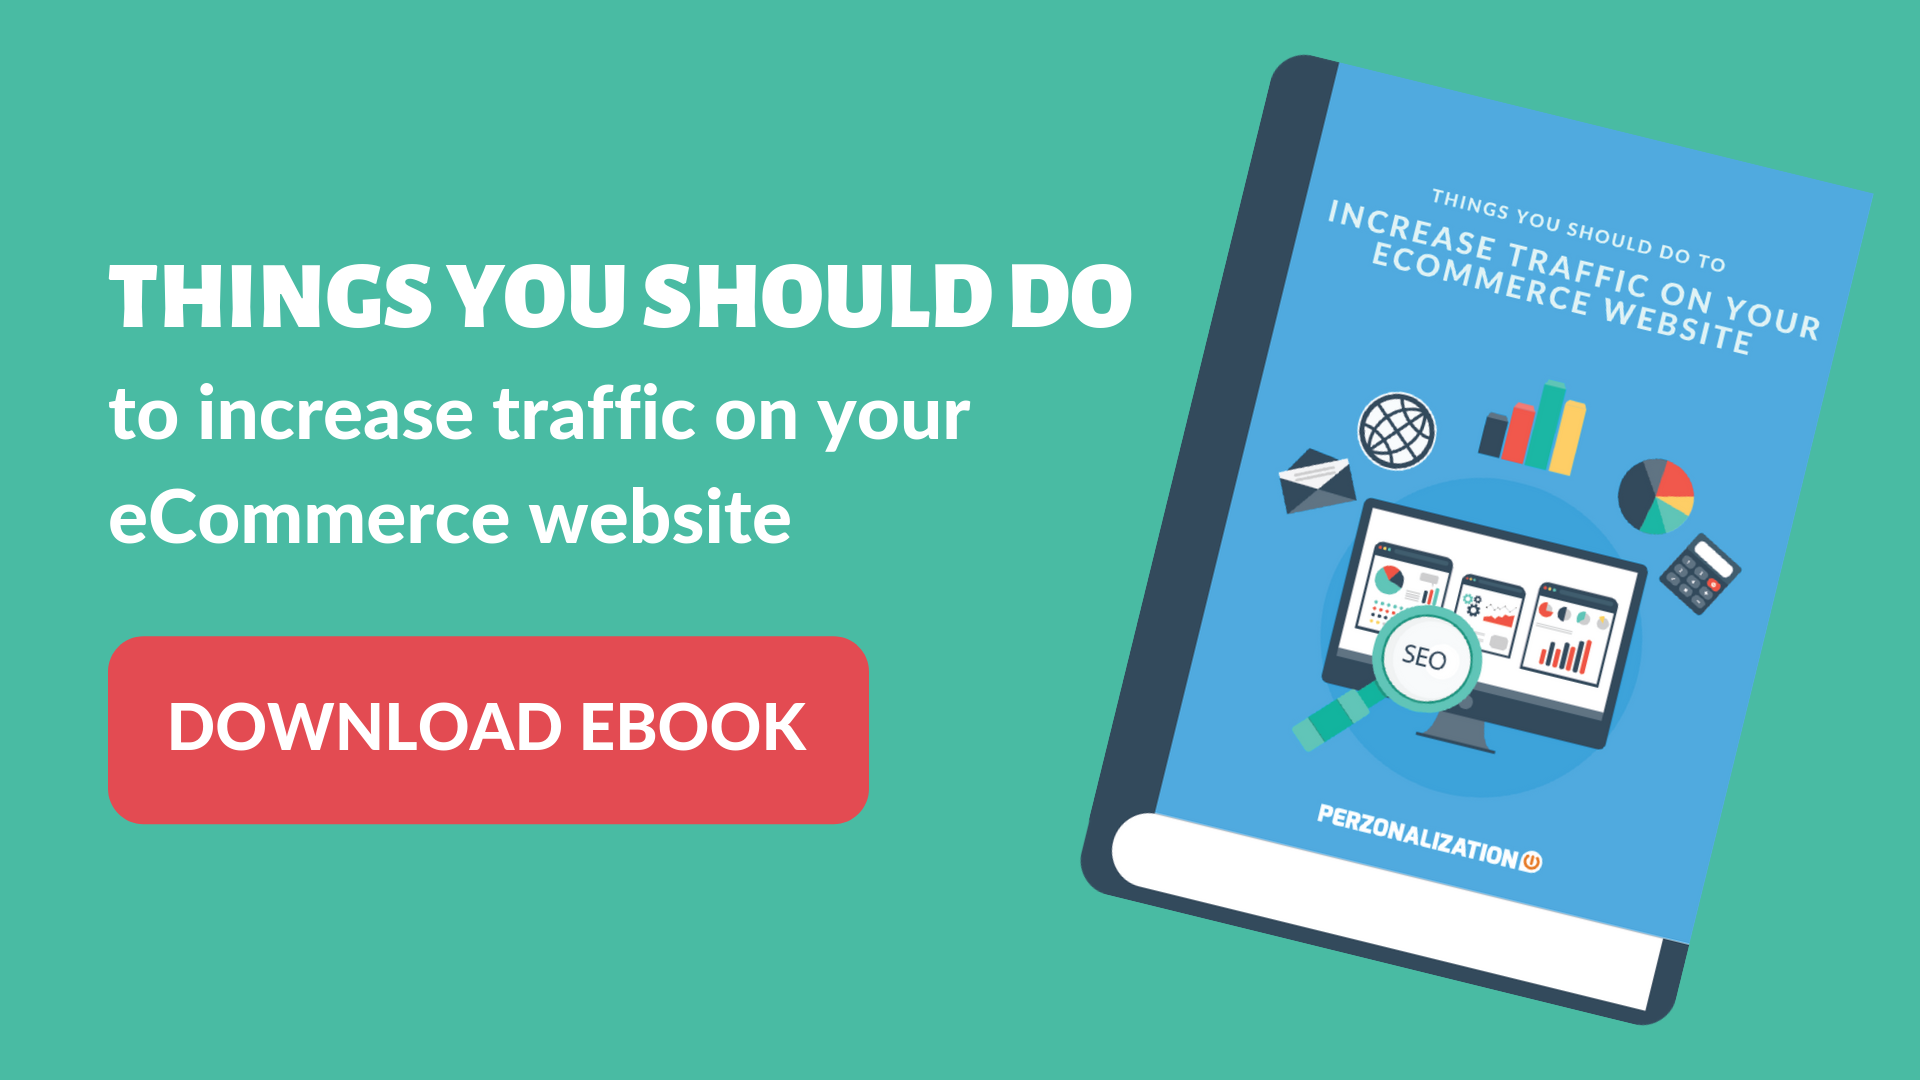 Download free ebook: Things you should do to increase traffic on your eCommerce website